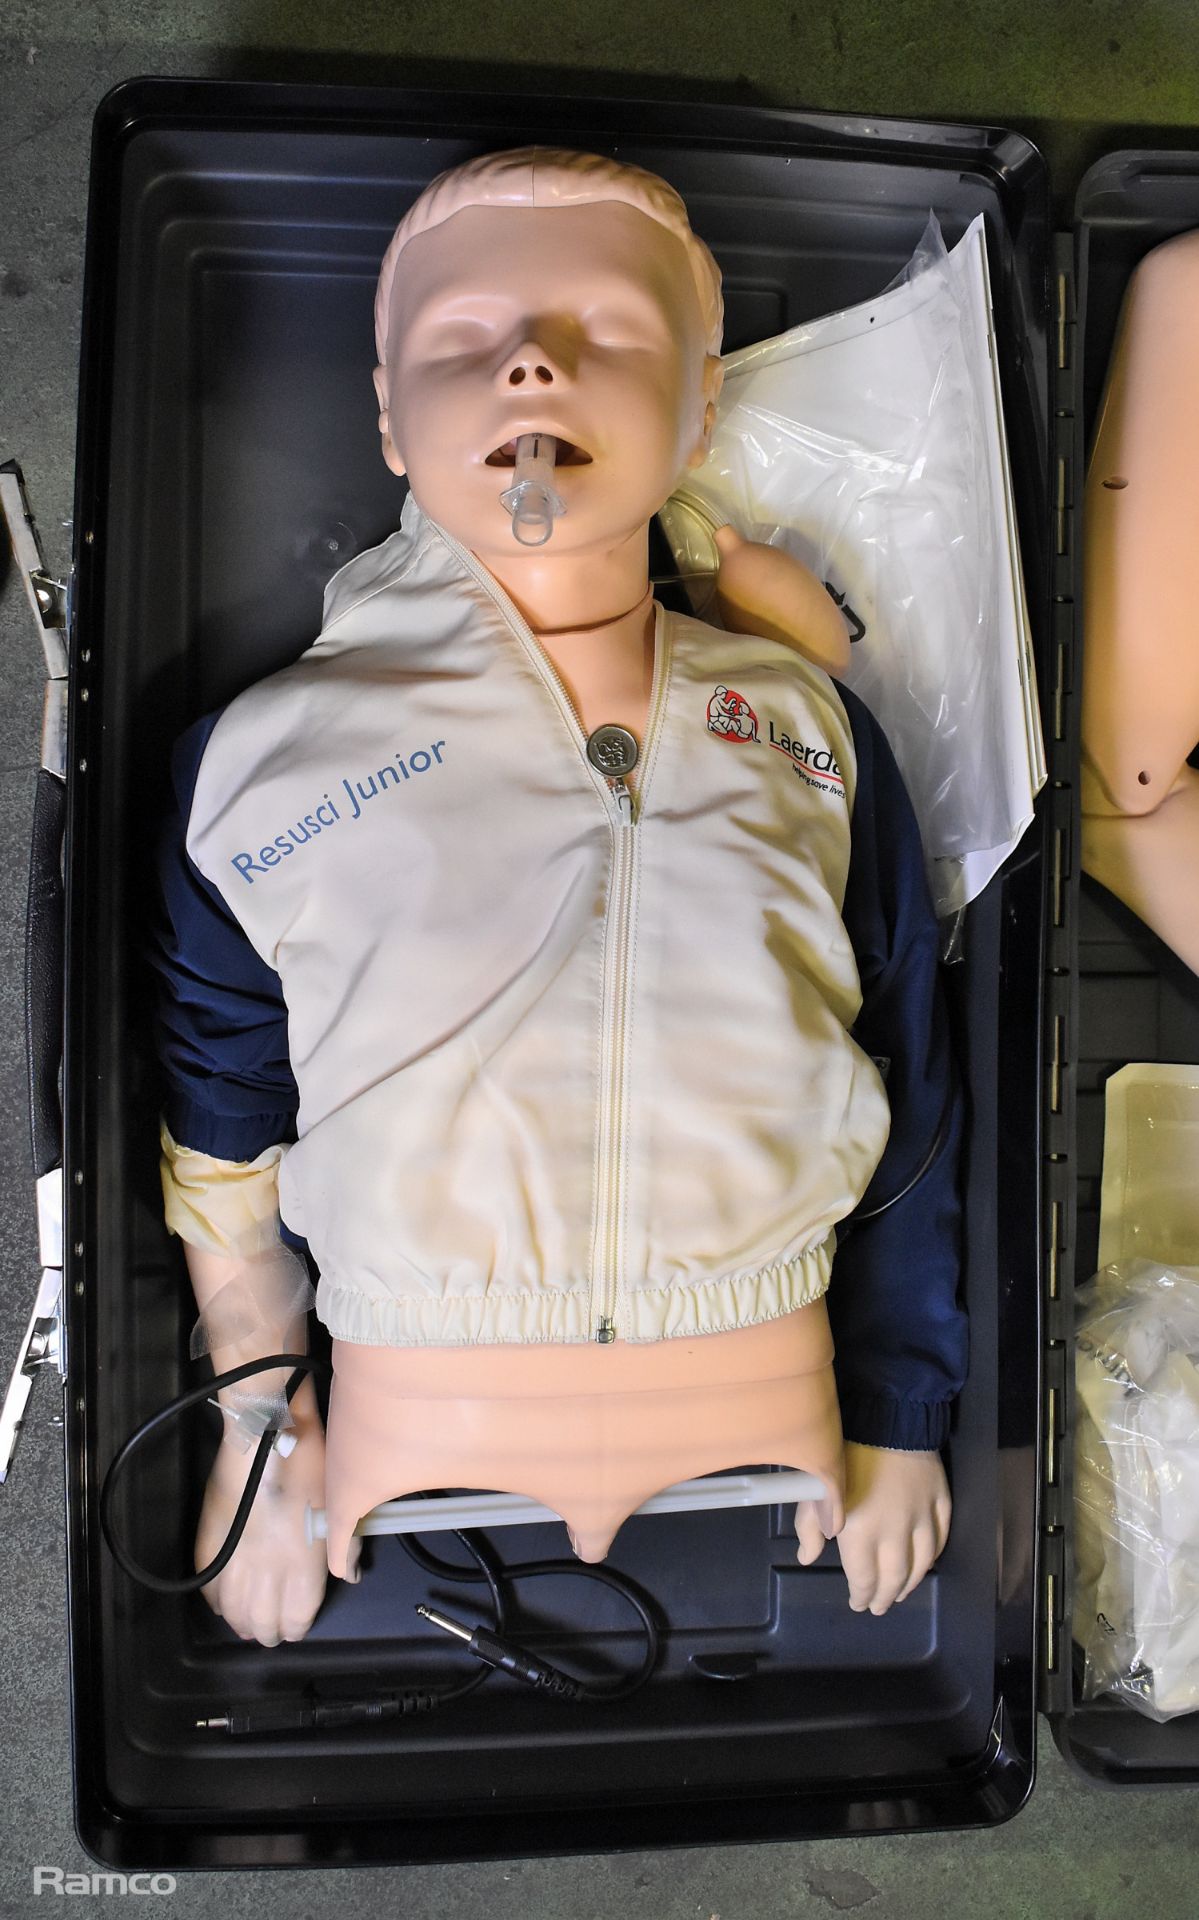 Laerdal Resusci Junior training dummy with carry case - Image 2 of 9